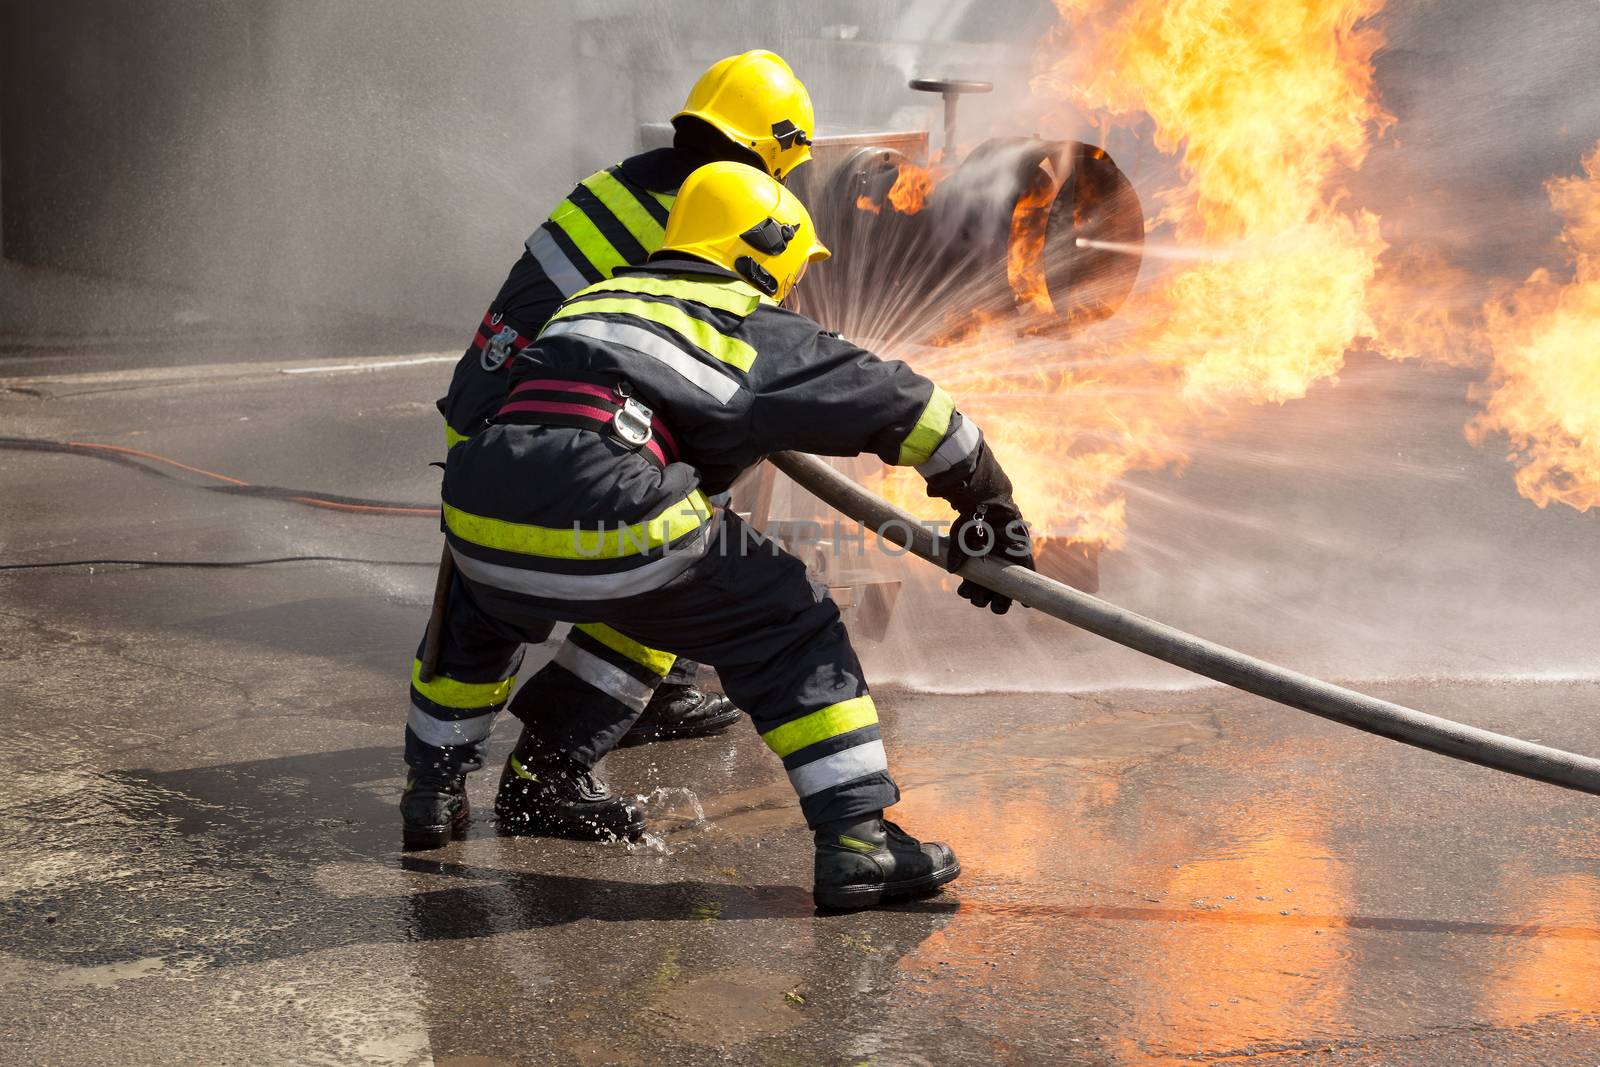 Firefighters in action. Fire department training. by wellphoto